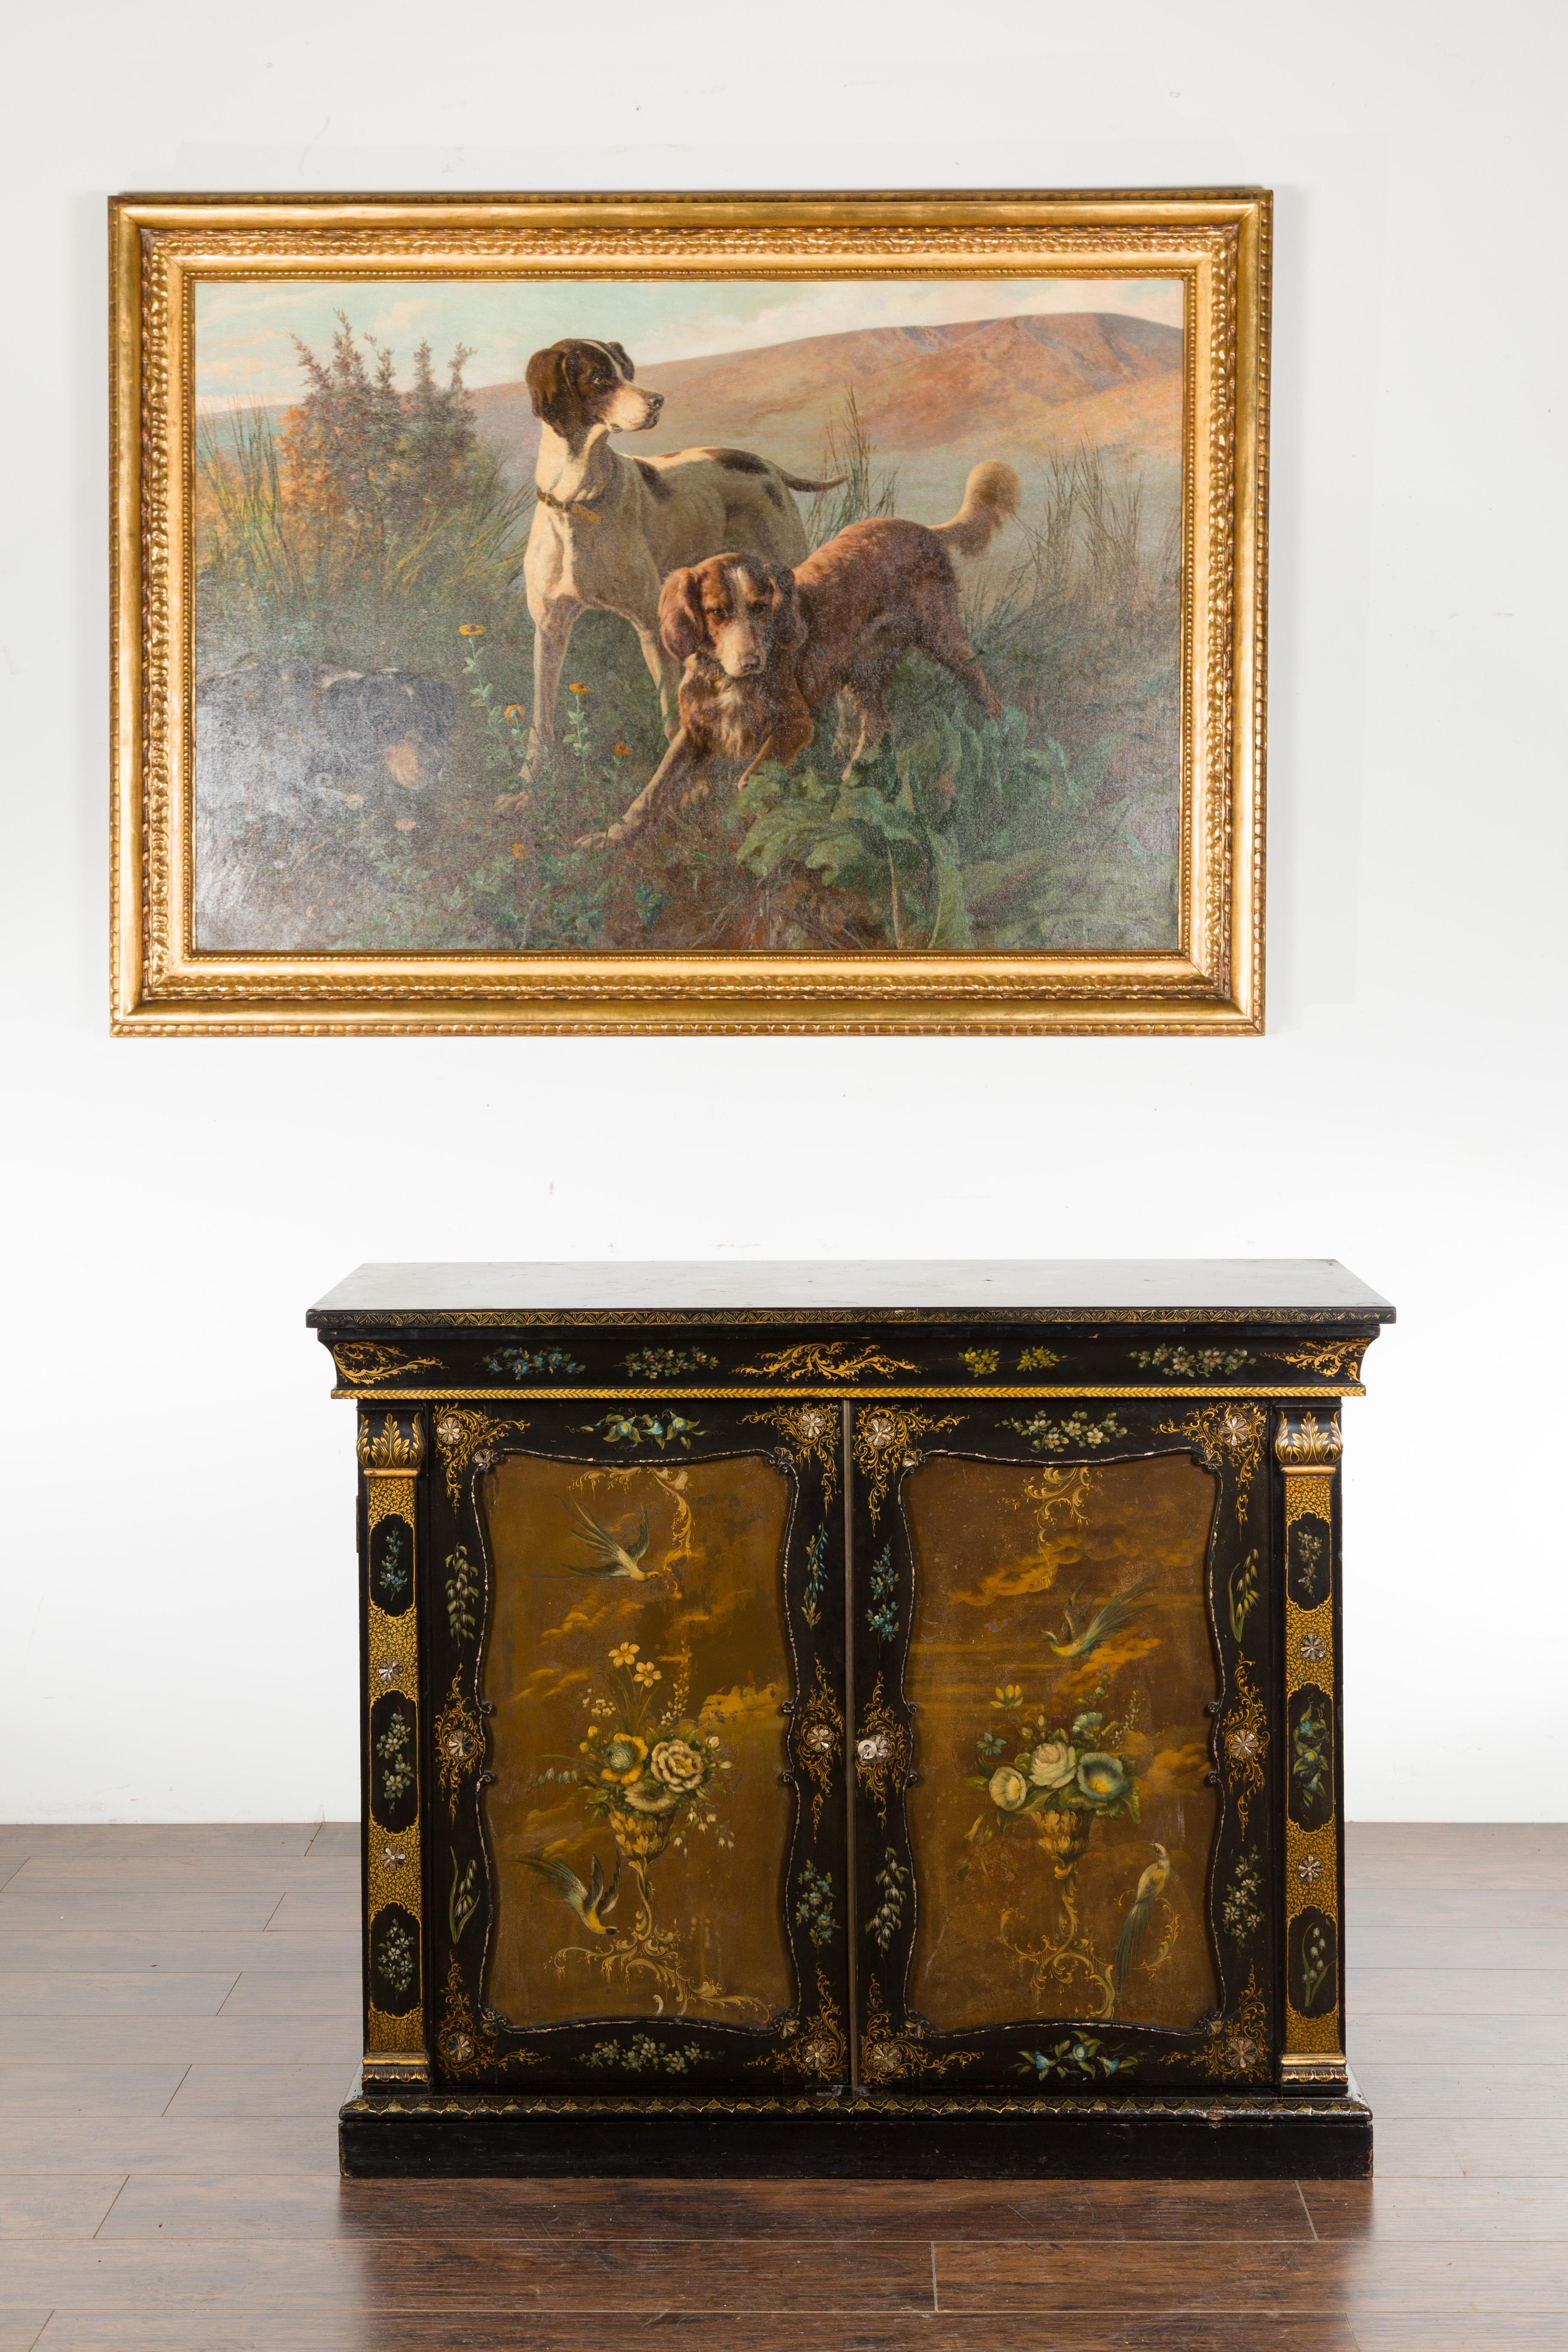 An English black and gold cabinet from the 19th century, with painted floral marble top. Created in England during the 19th century, this exquisite cabinet features a rectangular black marble top painted with a delicate decor depicting flowers and